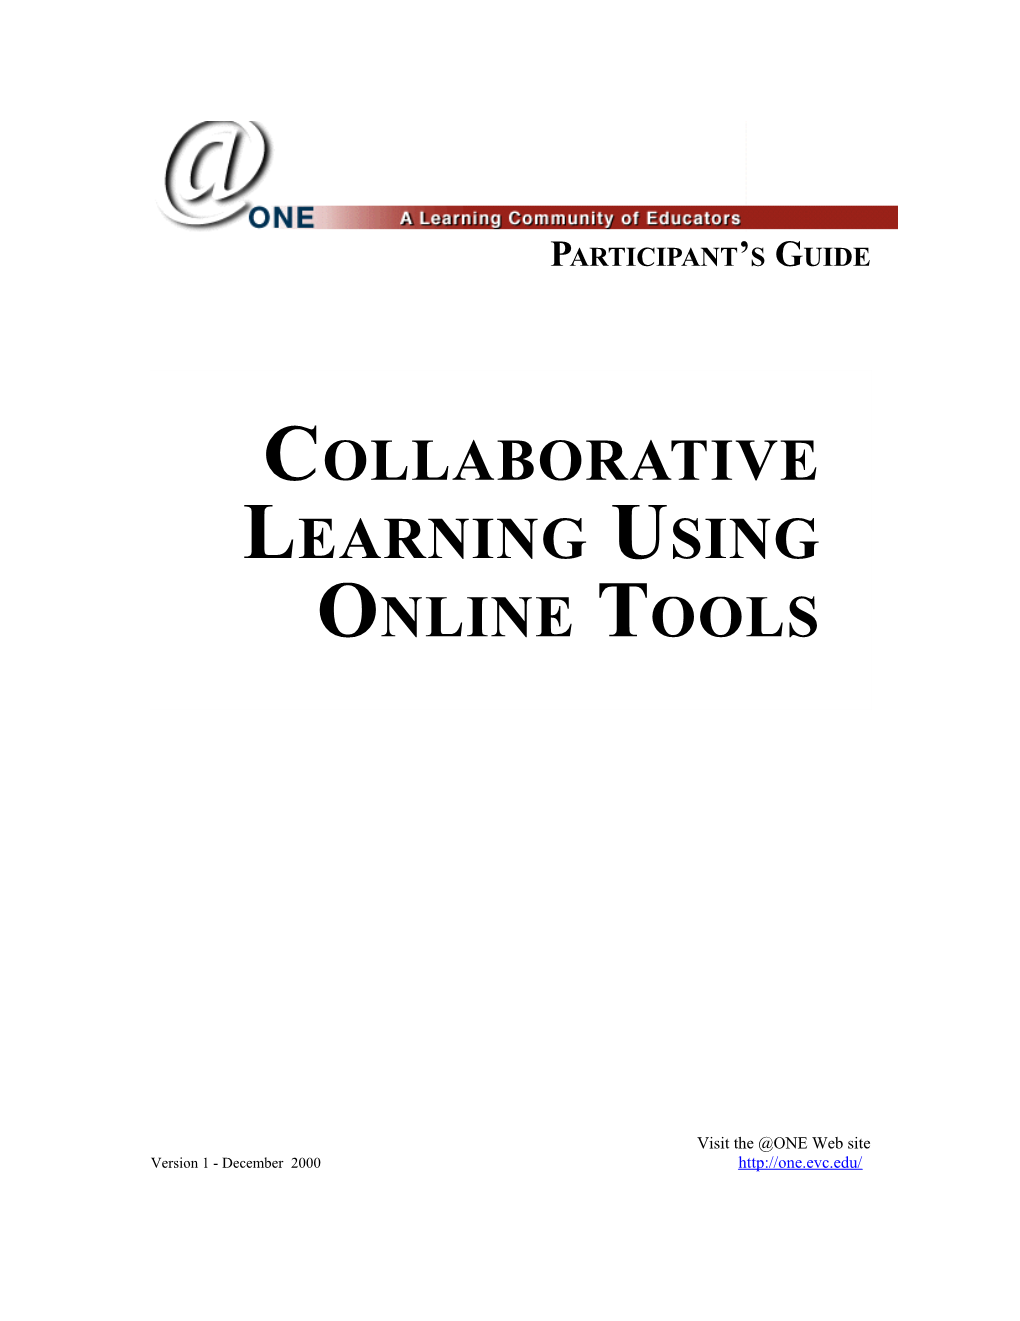 Collaborative Learning Using Online Tools